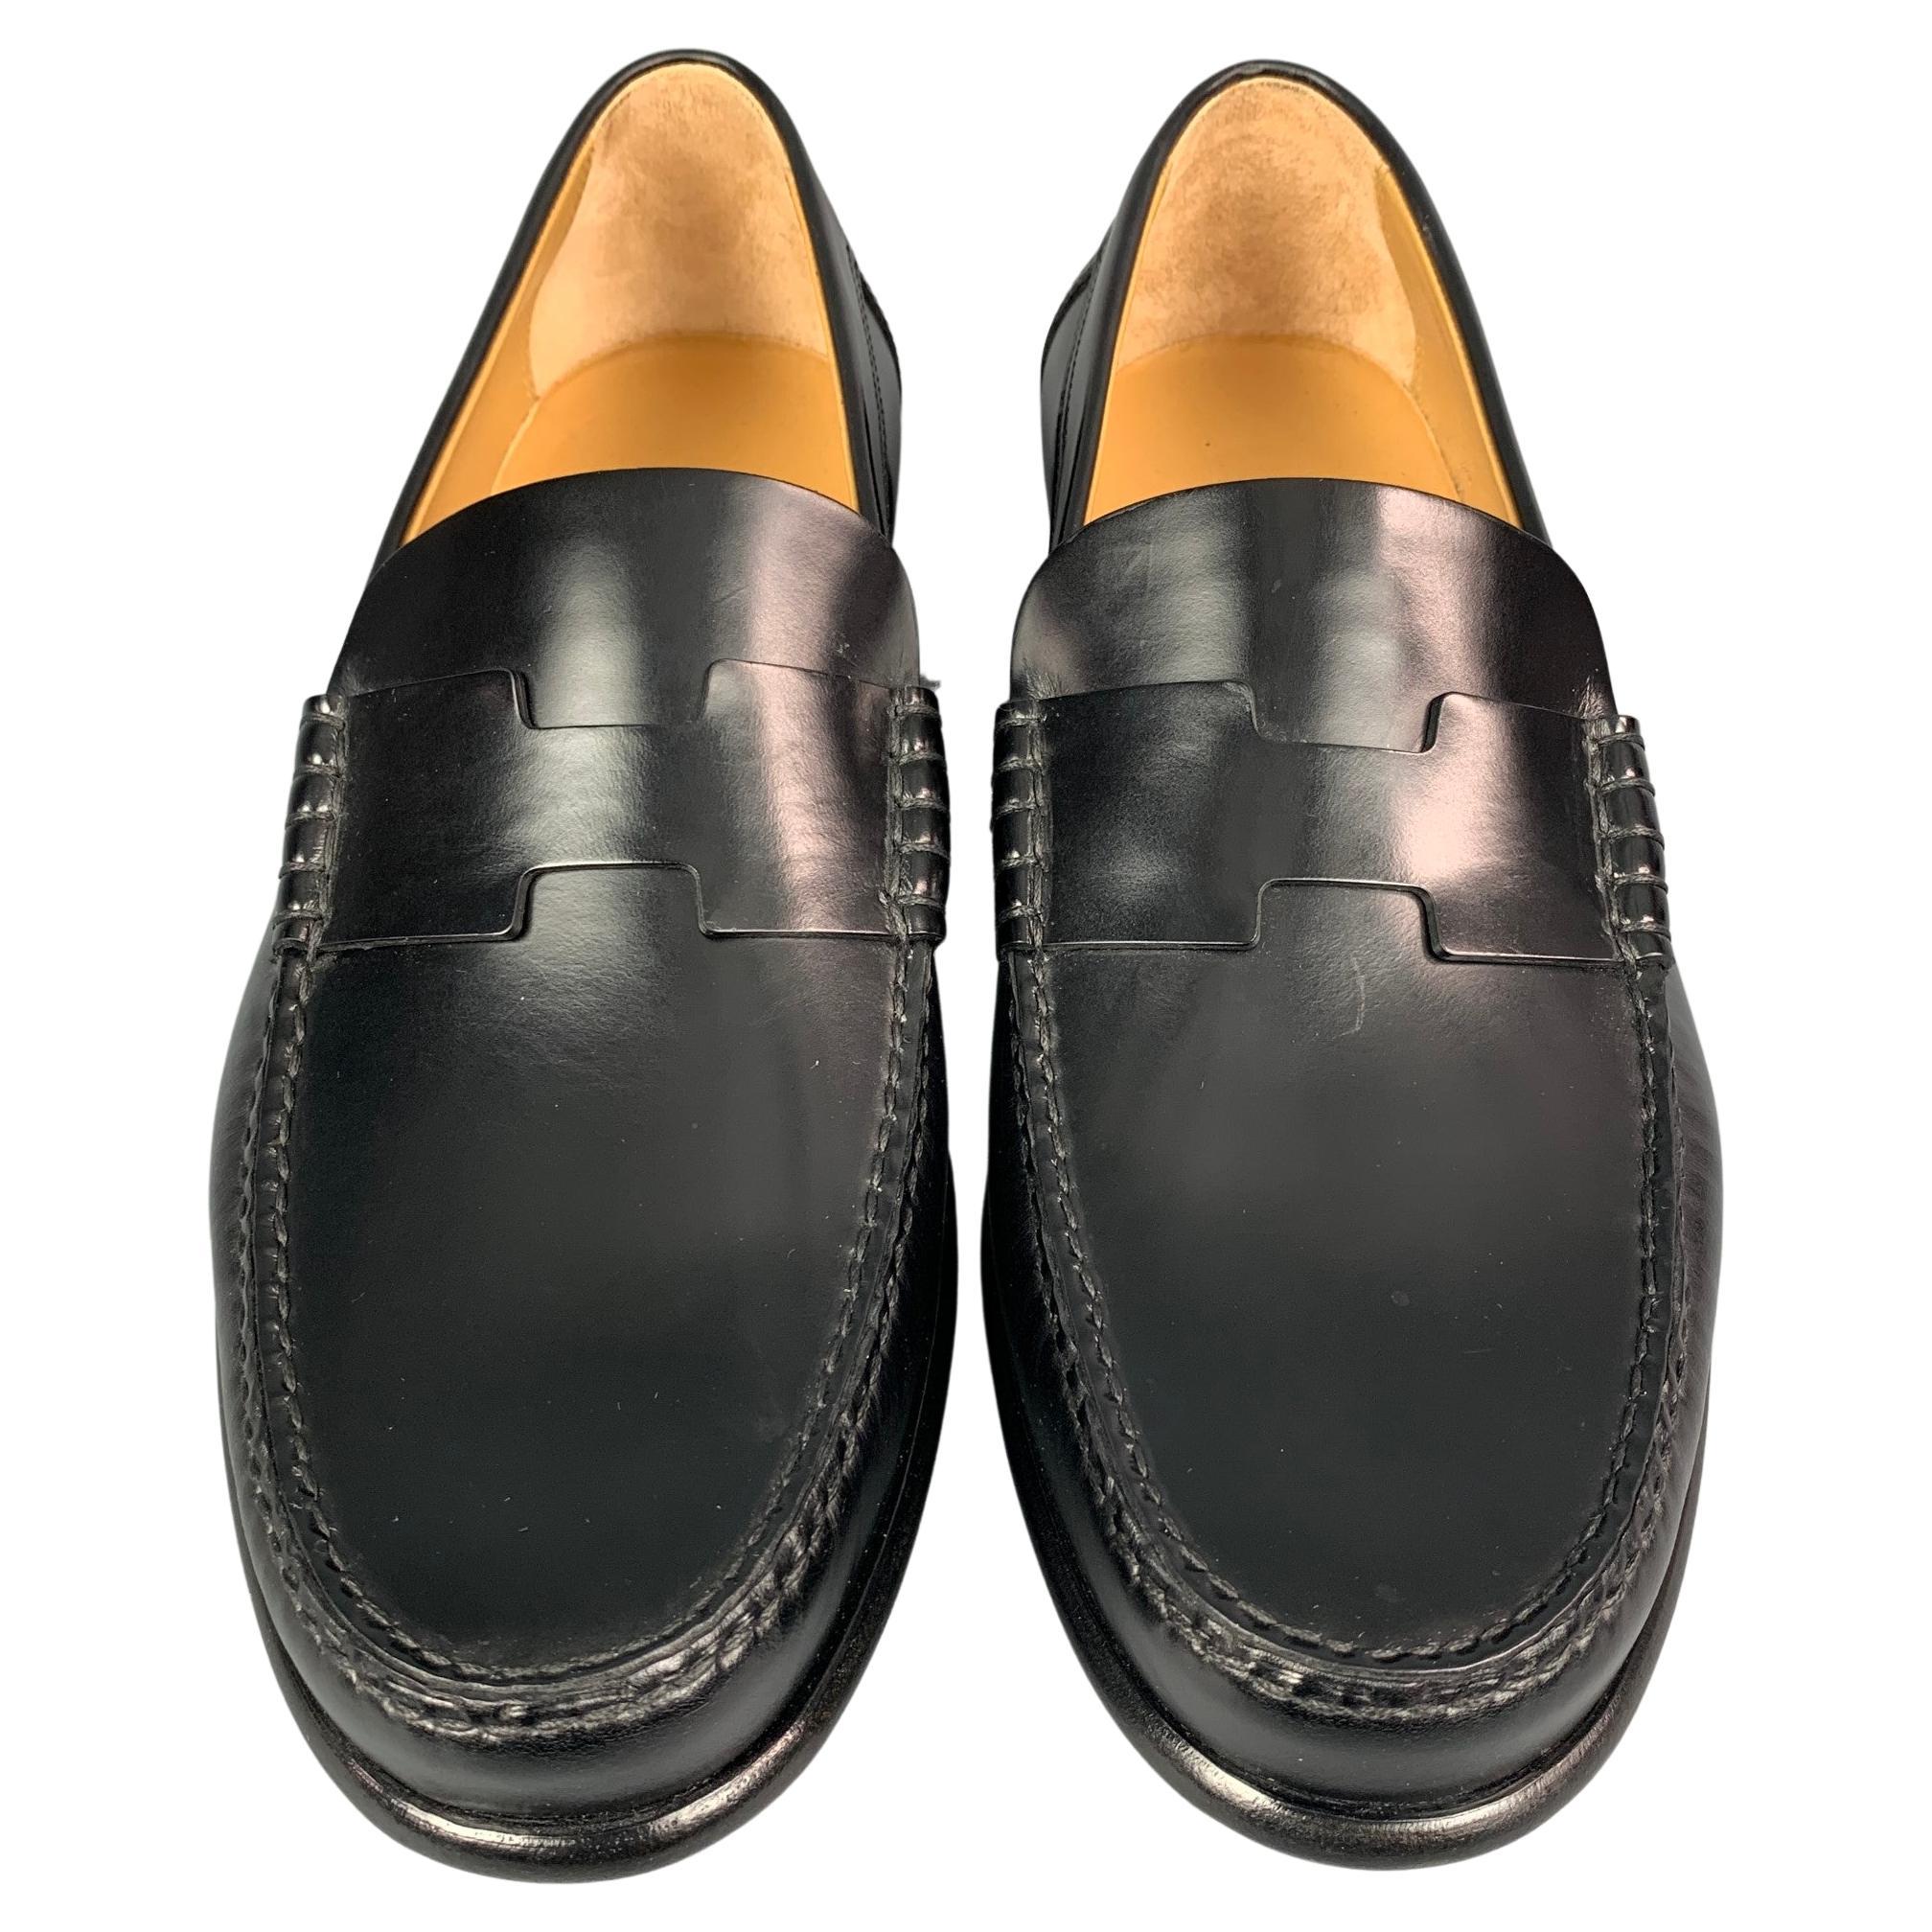 HERMES Size 9 Black Leather Slip On Kennedy Loafers